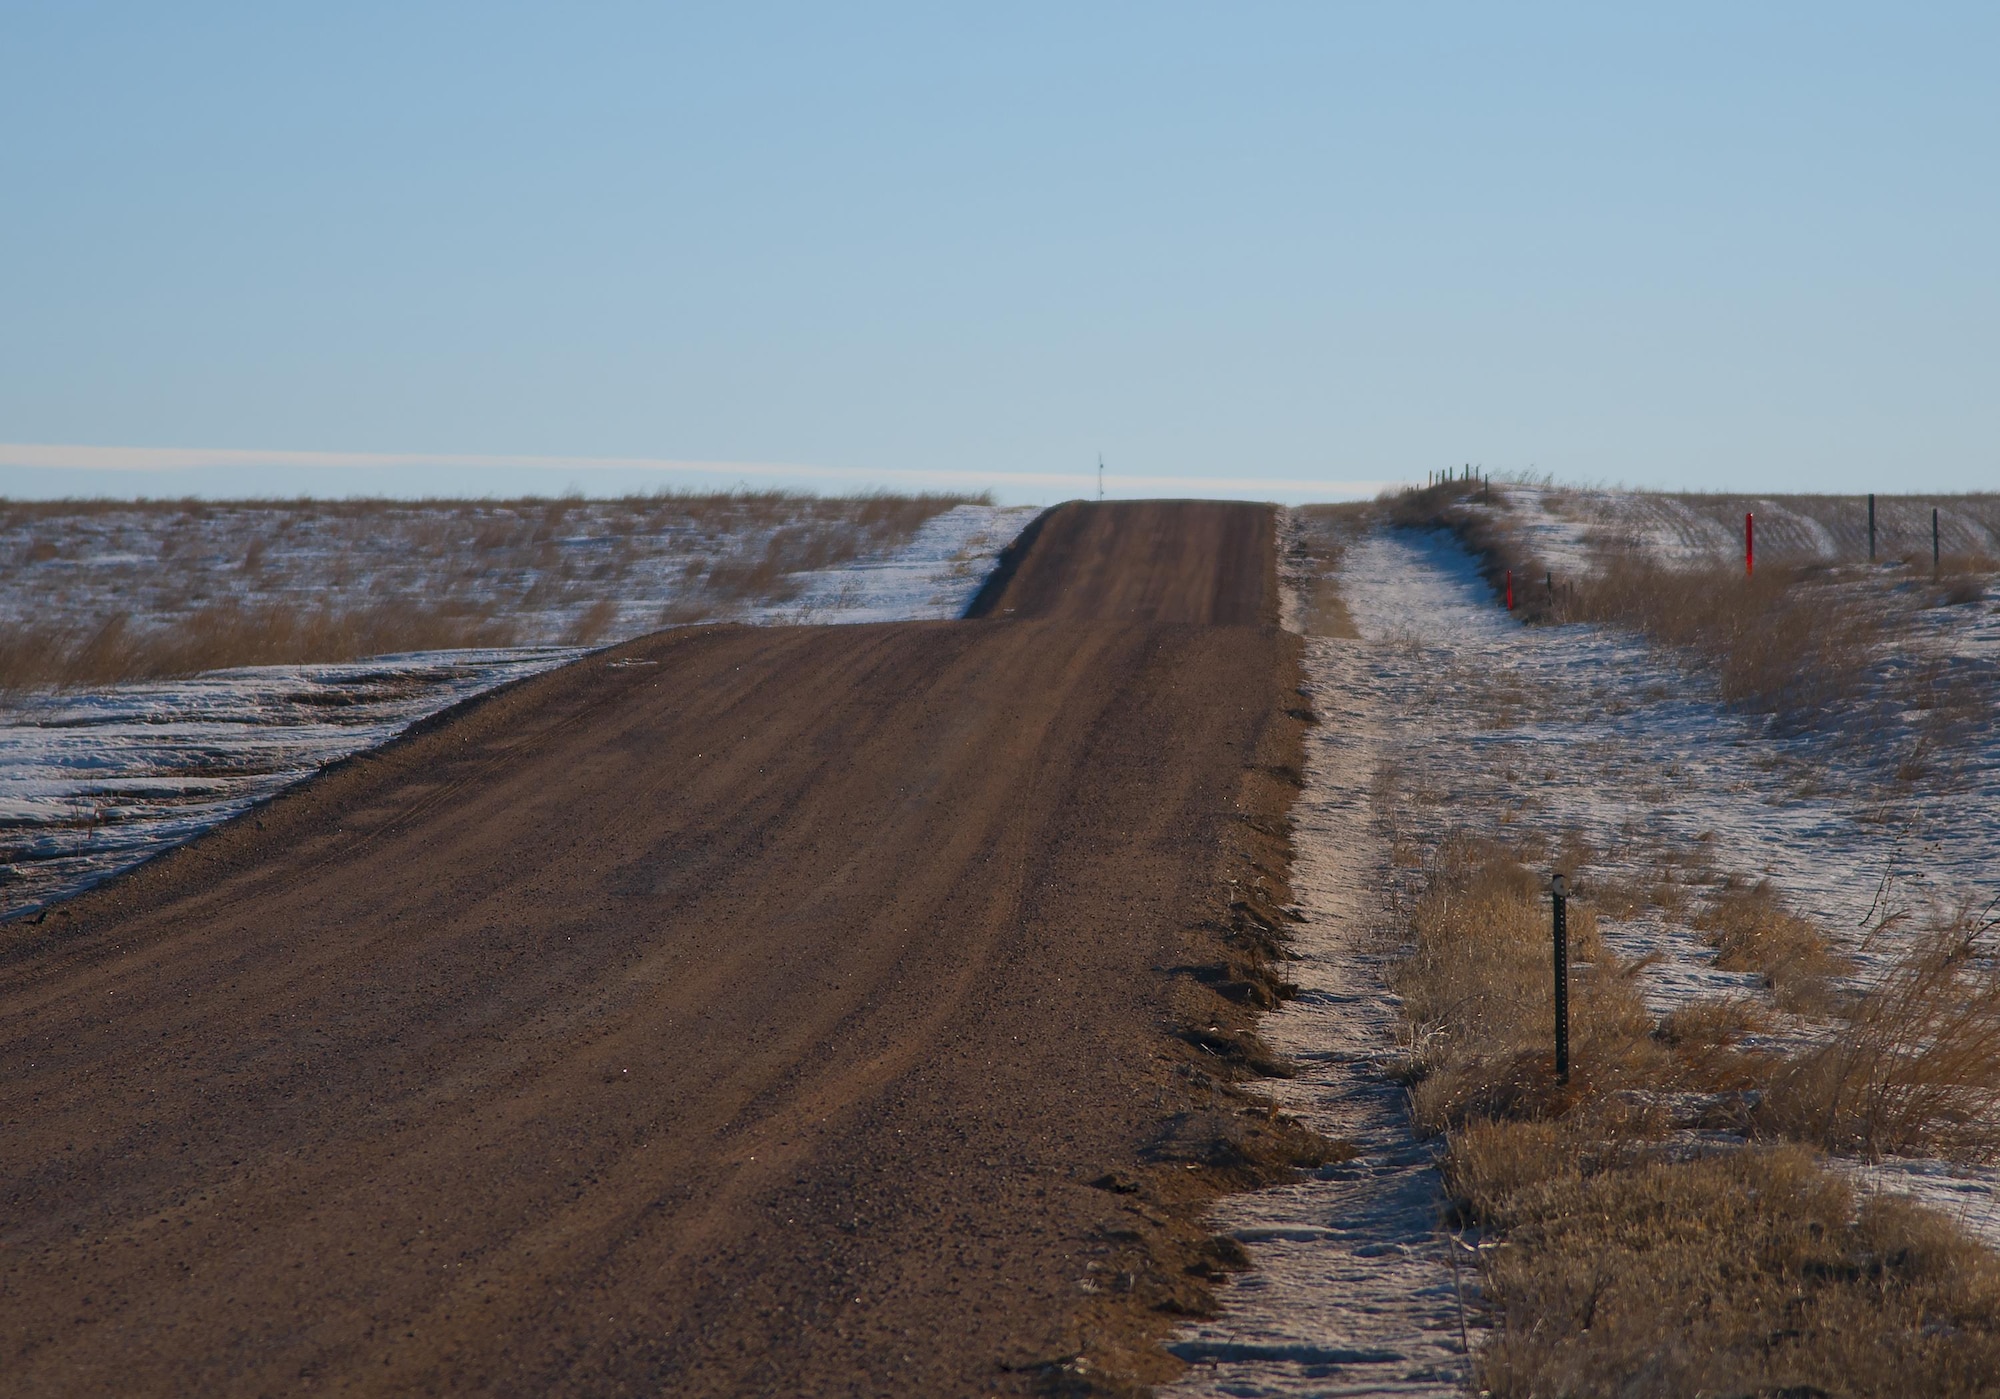 This photo depicts a hilly stretch of gravel road in the F.E. Warren Air Force Base, Wyo., missile complex. A combined total of more than 7 million miles is driven by Mighty Ninety Airmen annually. Much of the driving is done over roads like these, which can be especially hazardous in the winter, so all base personnel traveling in the missile complex receive specialized training for these conditions. (U.S. Air Force photo by Senior Airman Jason Wiese)